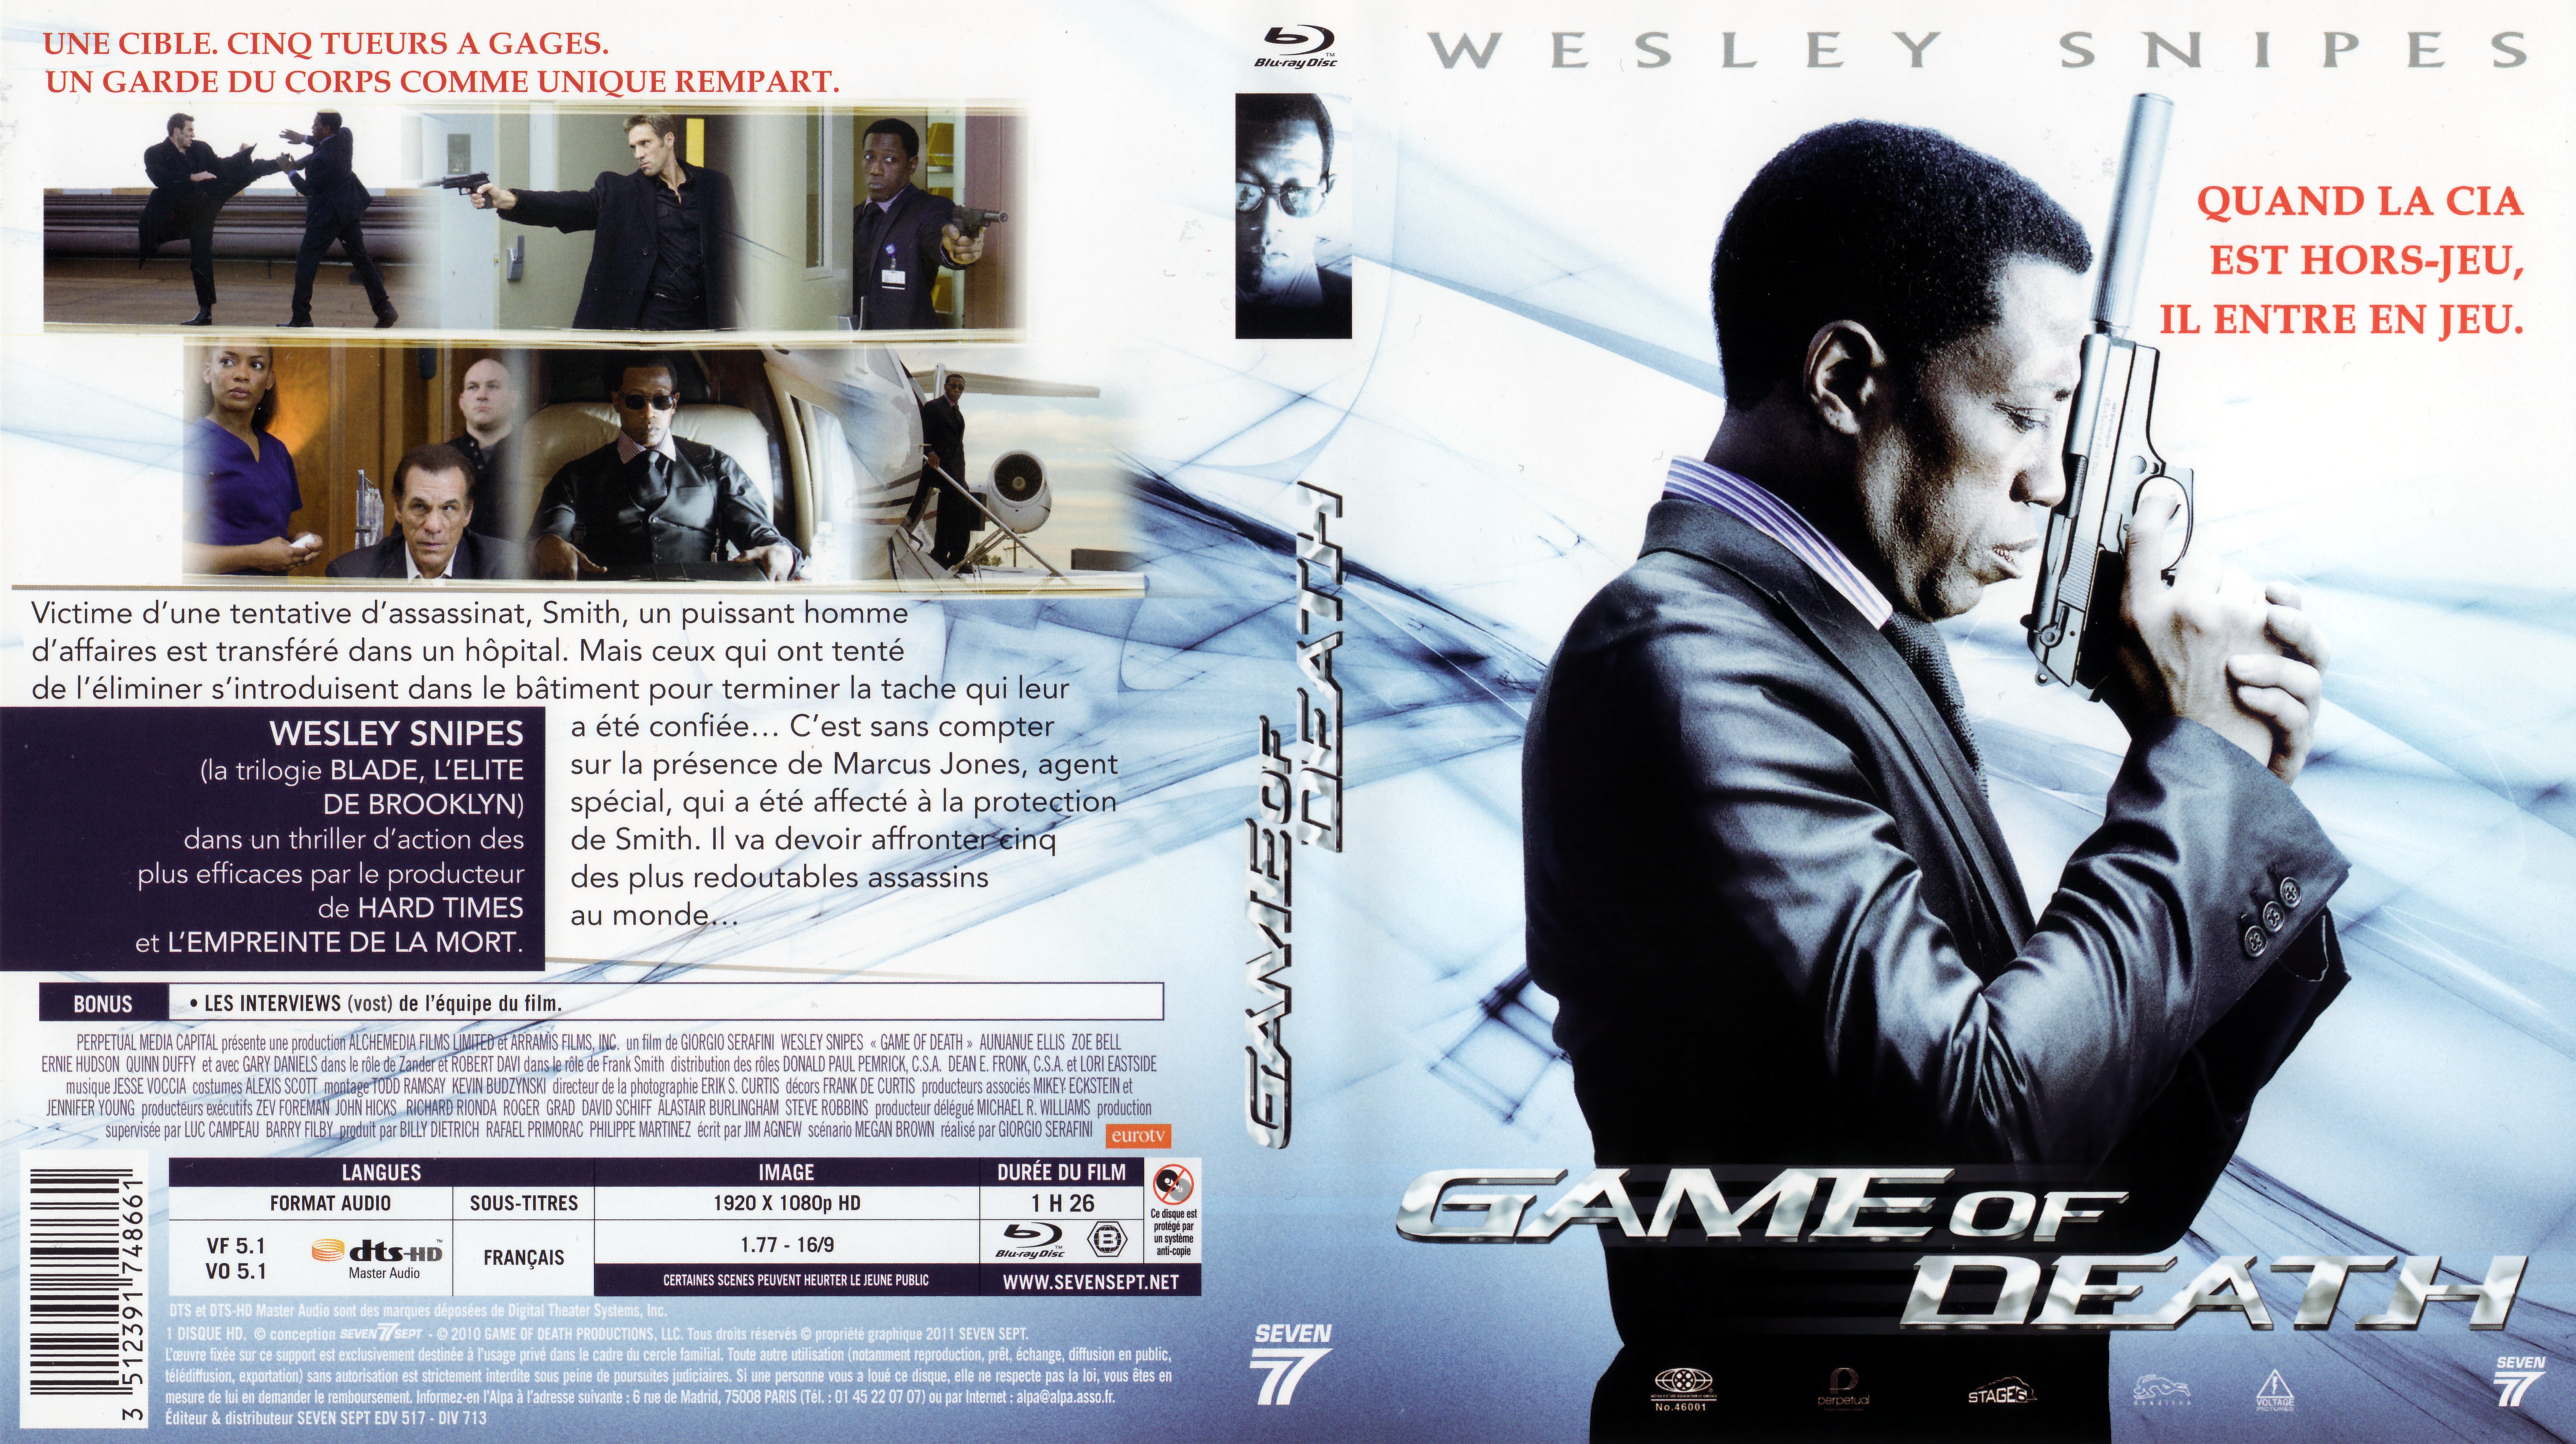 Jaquette DVD Game of death (BLU-RAY) v2